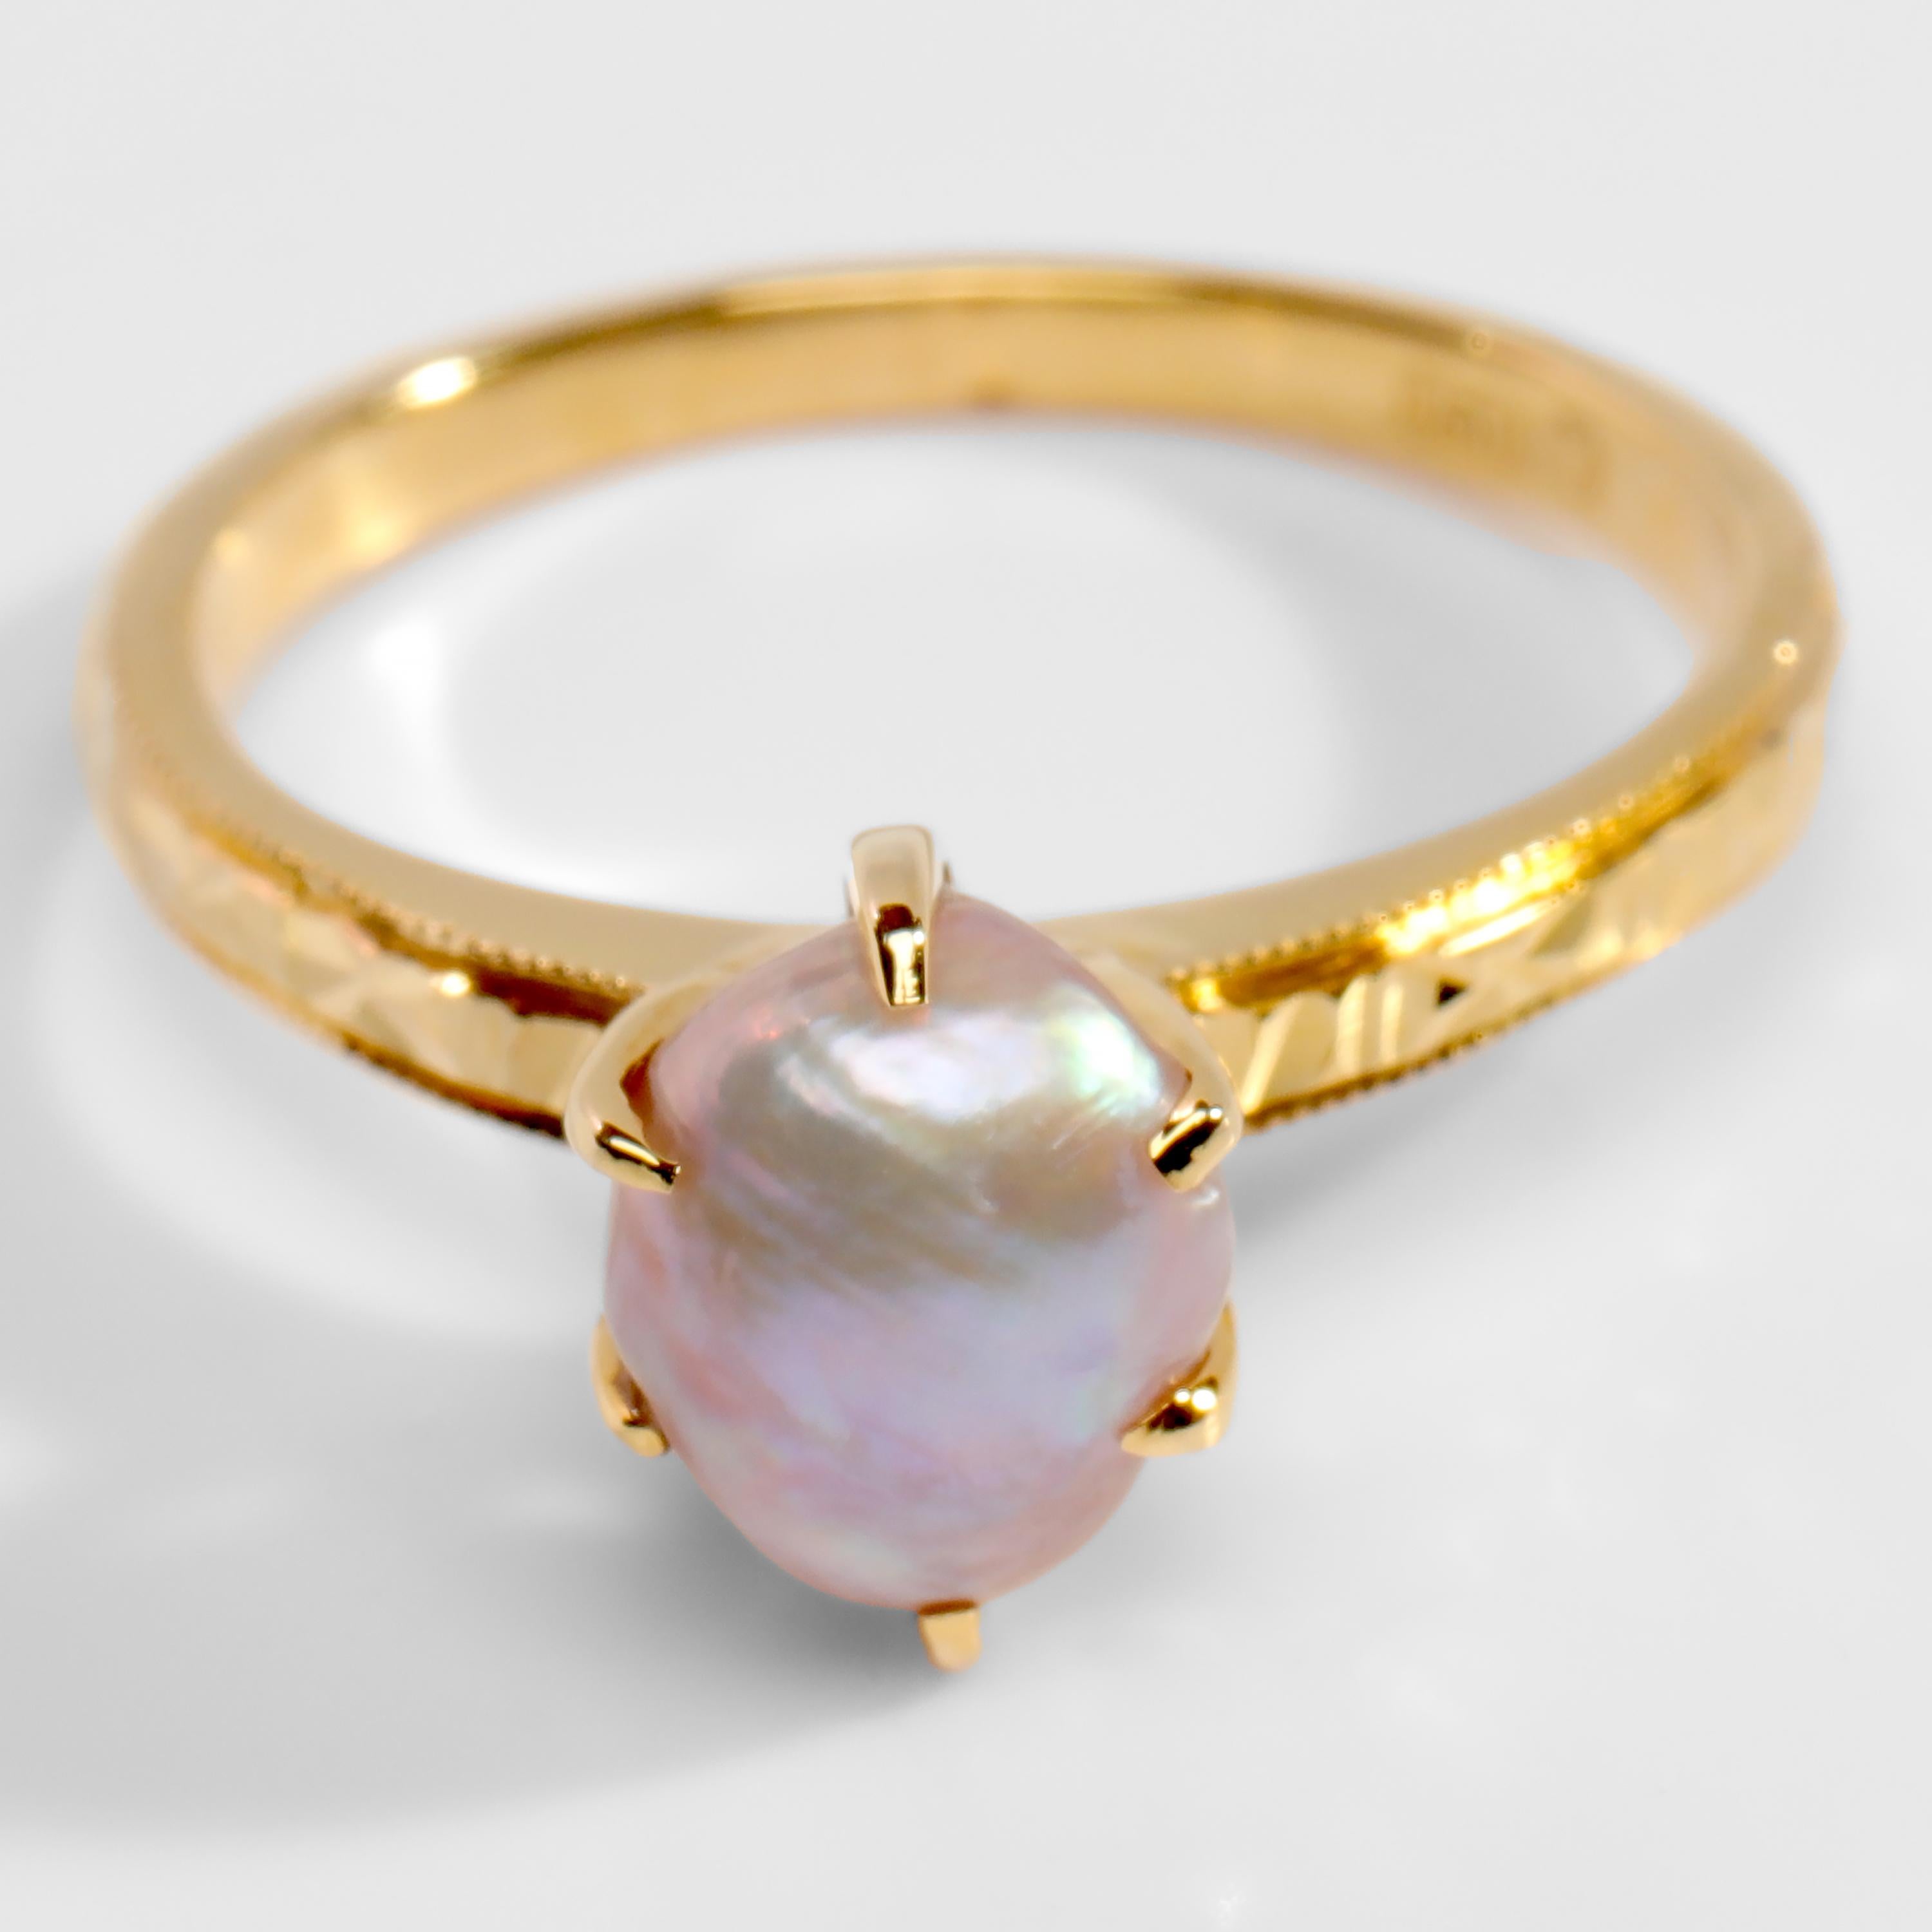 Women's or Men's Basra Pearl Ring of Spectacular Color and Quality Certified Natural